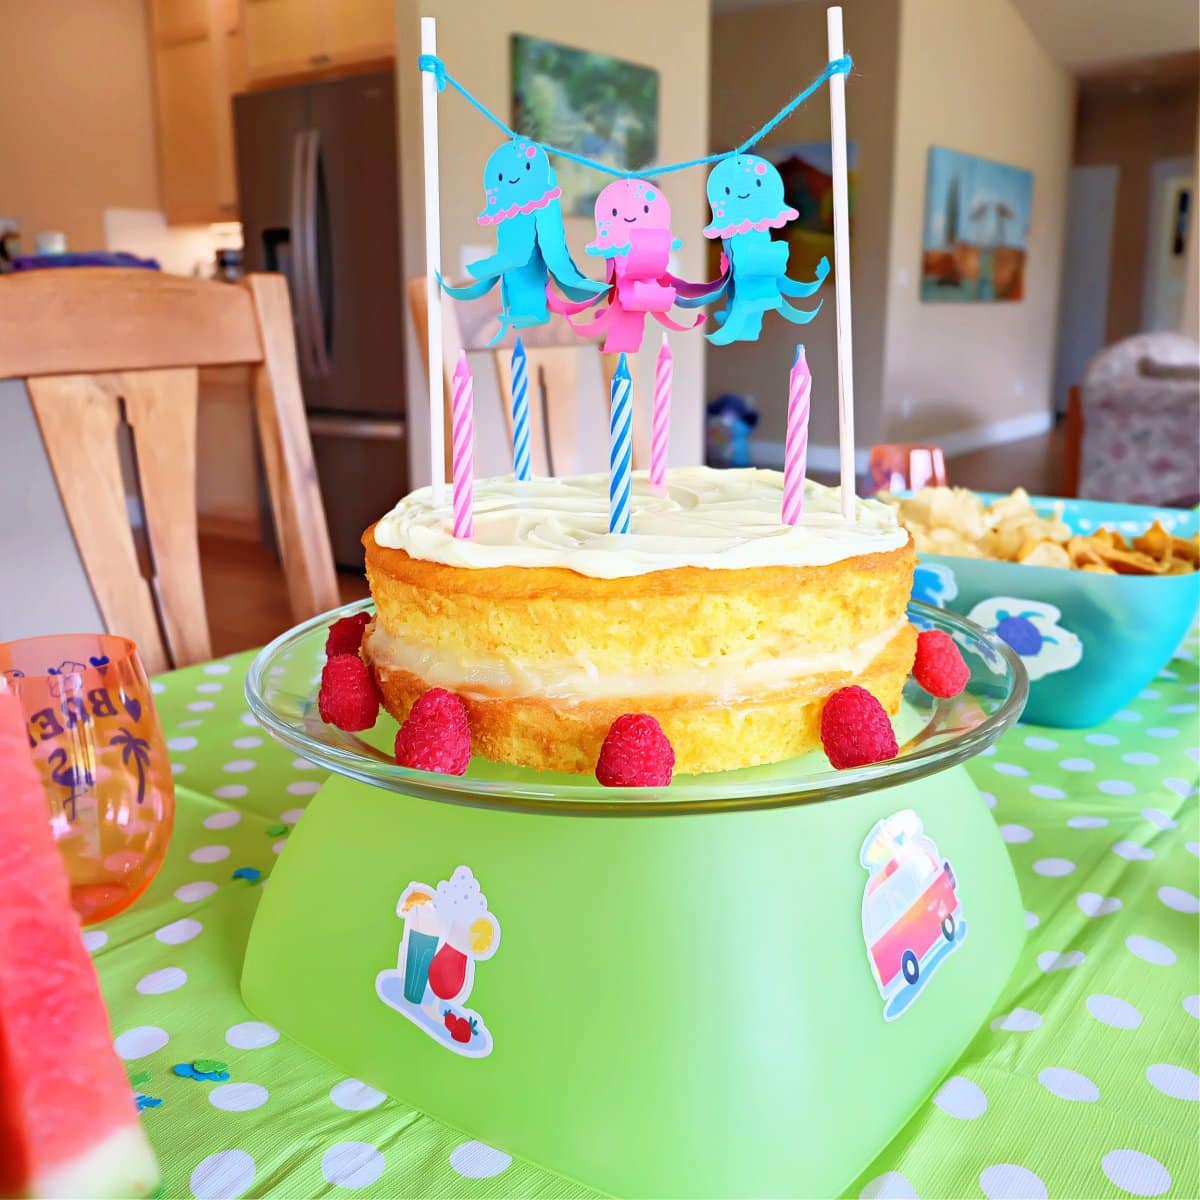 DIY Jellyfish Birthday Cake Topper made with the Cricut